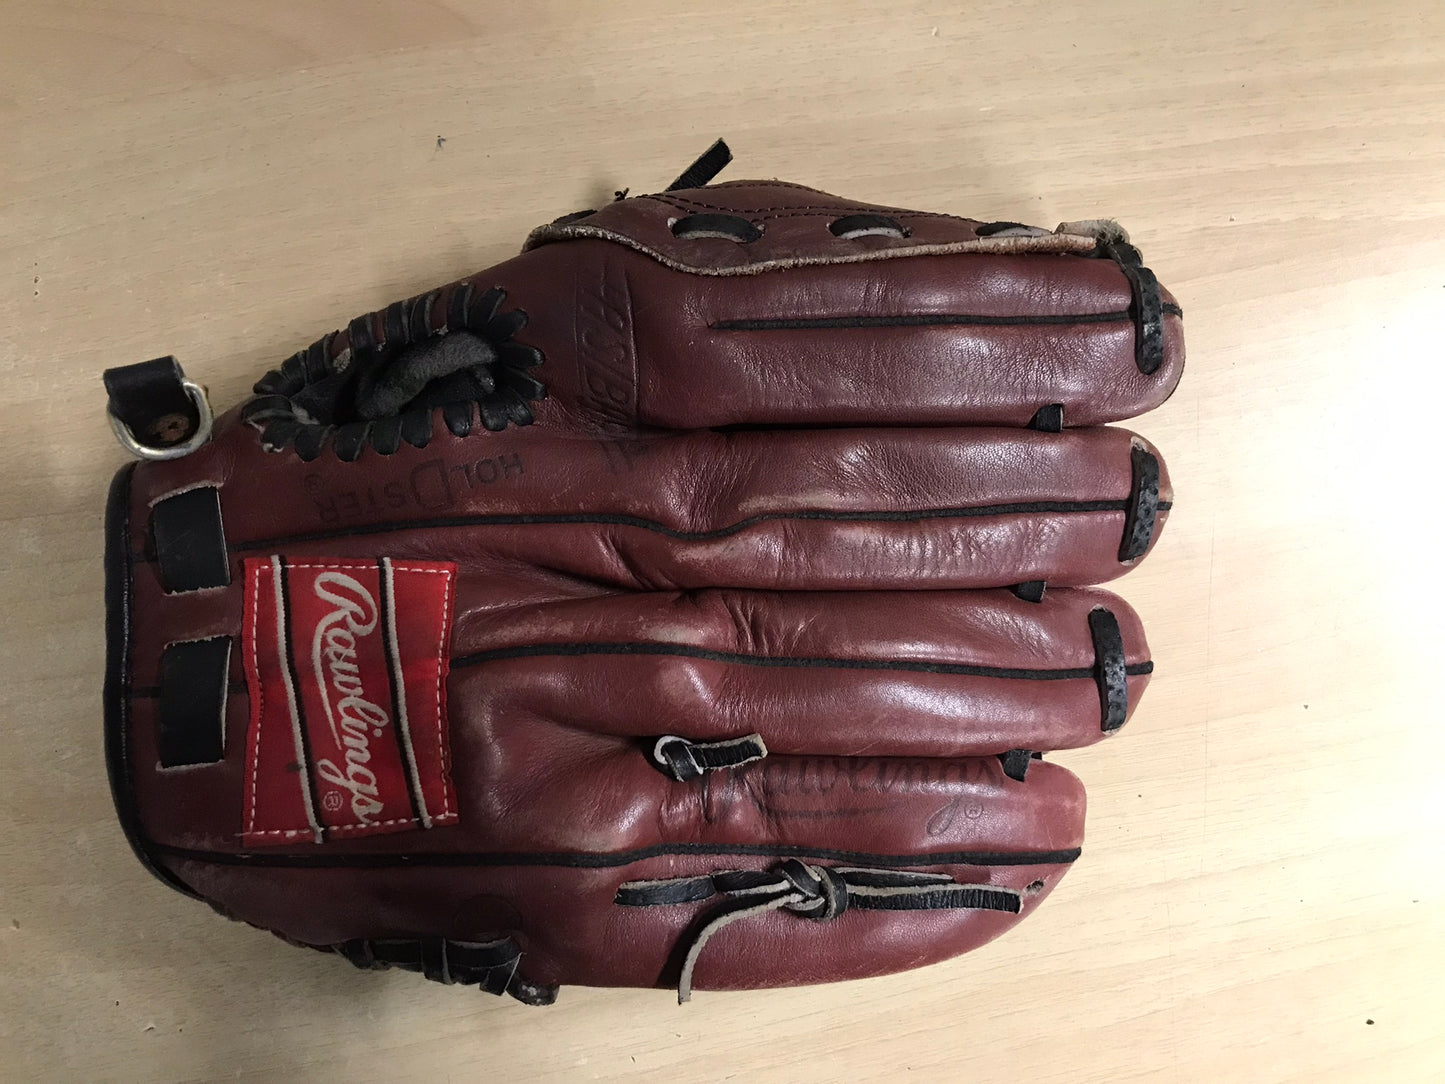 Baseball Glove Adult Size 11 inch Rawlings Deep Brown Leather Fits on RIGHT Hand